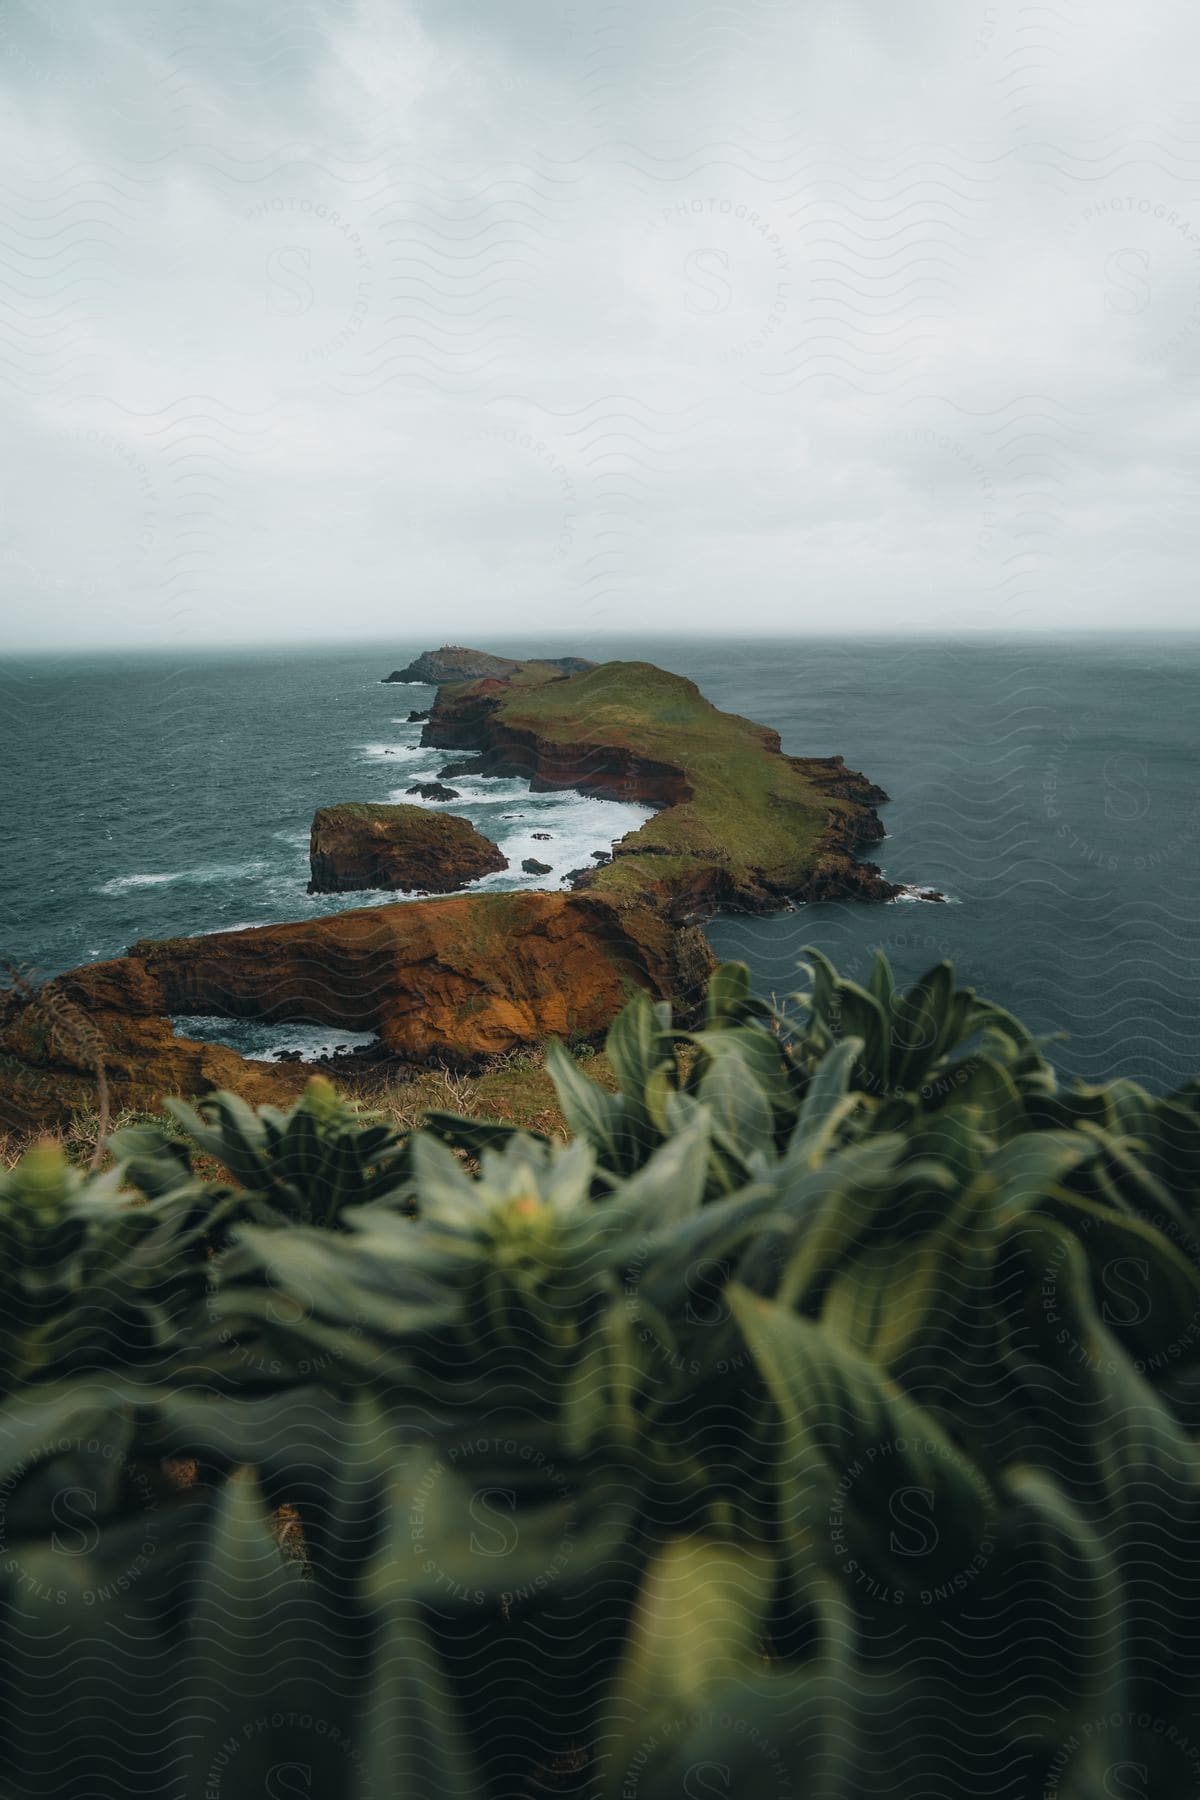 A rocky, verdant island jutting into the ocean under cloudy skies.